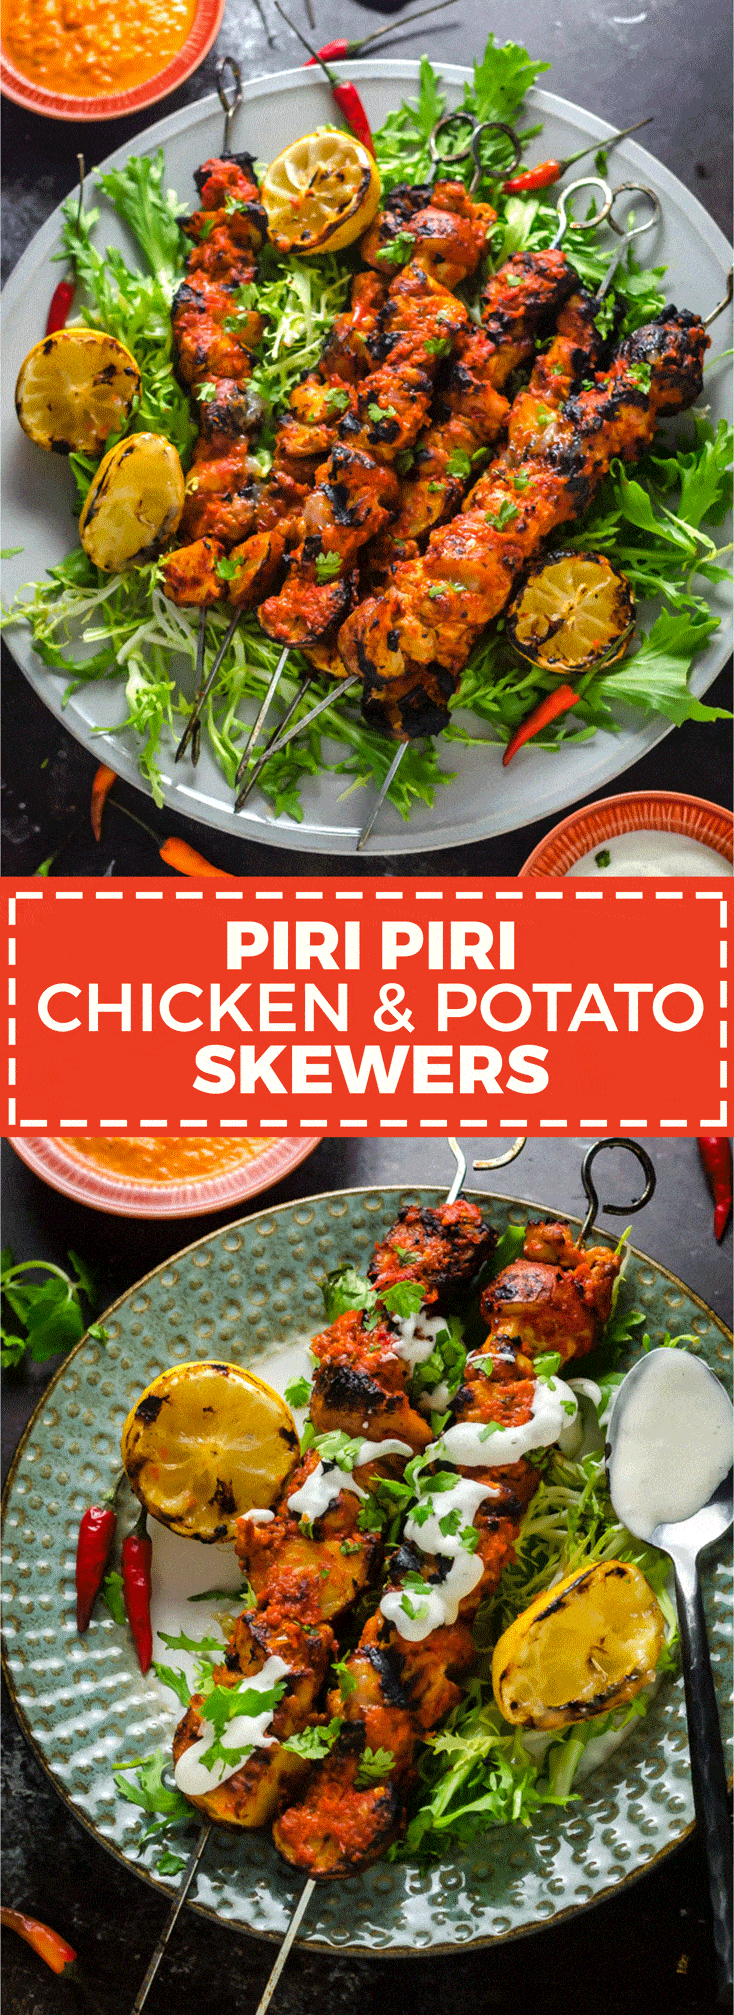 Piri Piri Chicken and Potato Skewers. This Portuguese and African inspired dish is spicy, smoky, tangy, and tender. It'll be a hit during grilling season. | hostthetoast.com